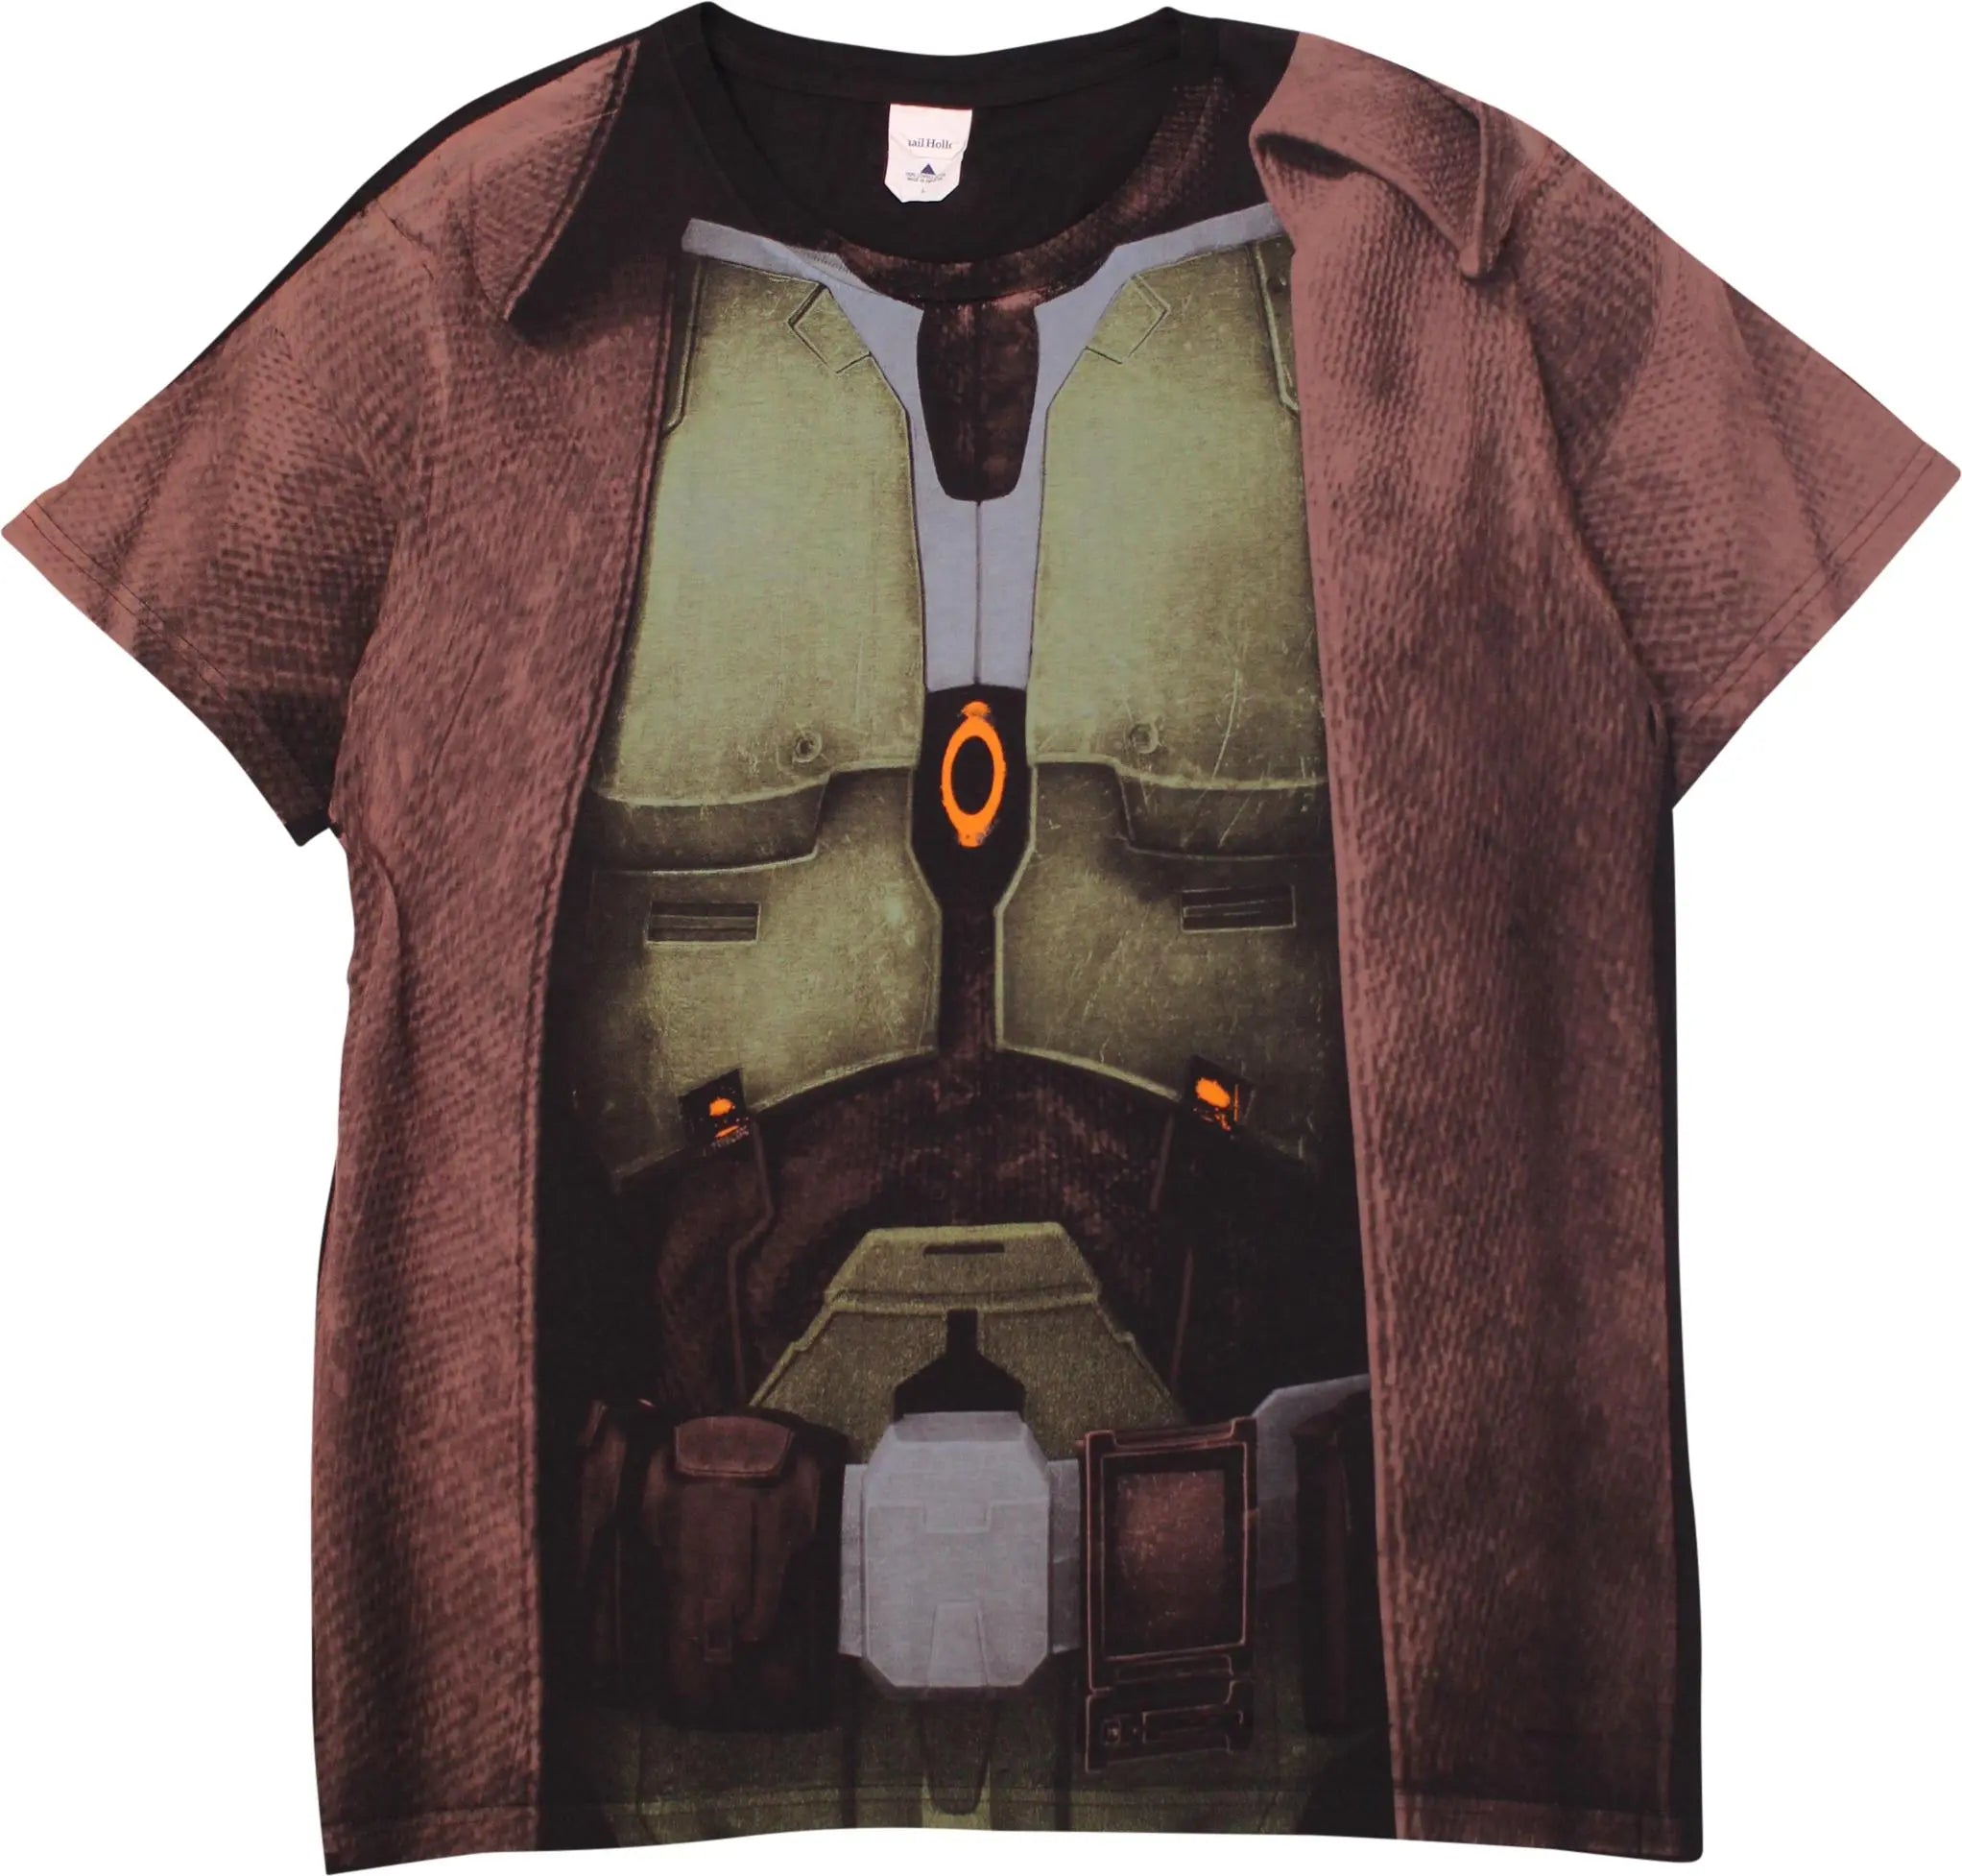 Quil Hollow - Star Wars The Old Republic T-shirt- ThriftTale.com - Vintage and second handclothing